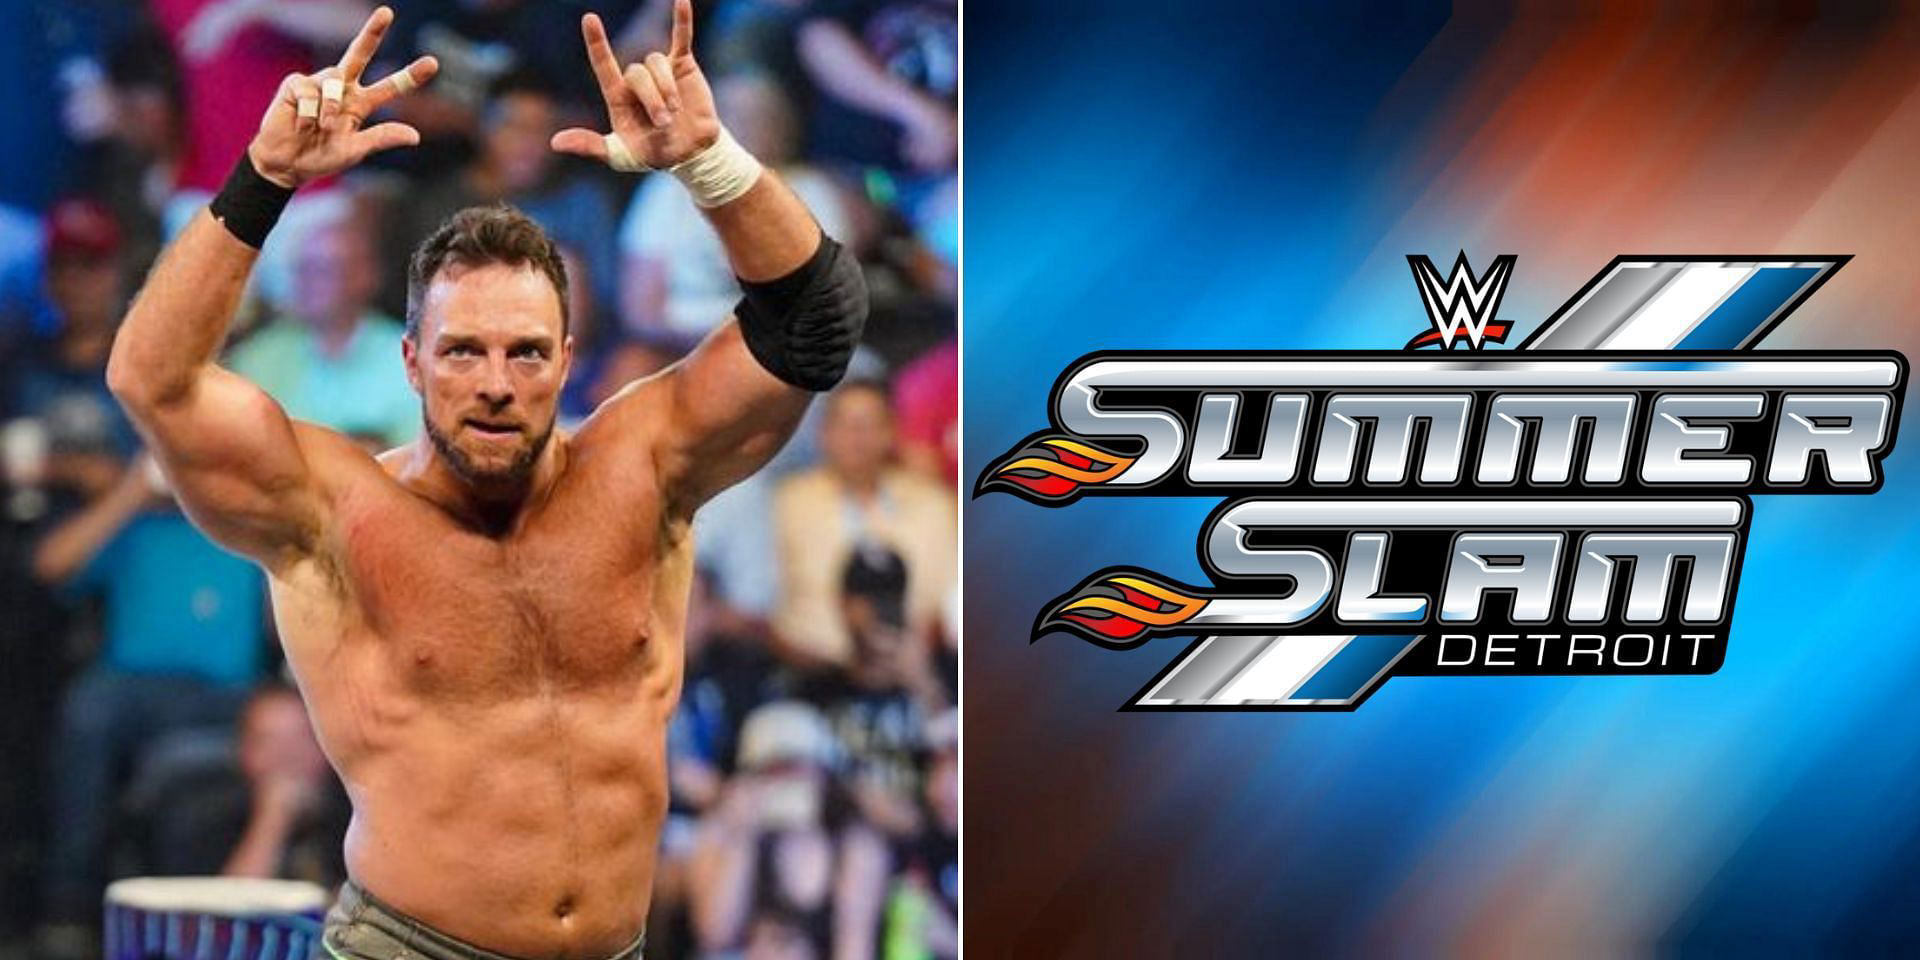 WWE officially announces LA Knight's match for SummerSlam